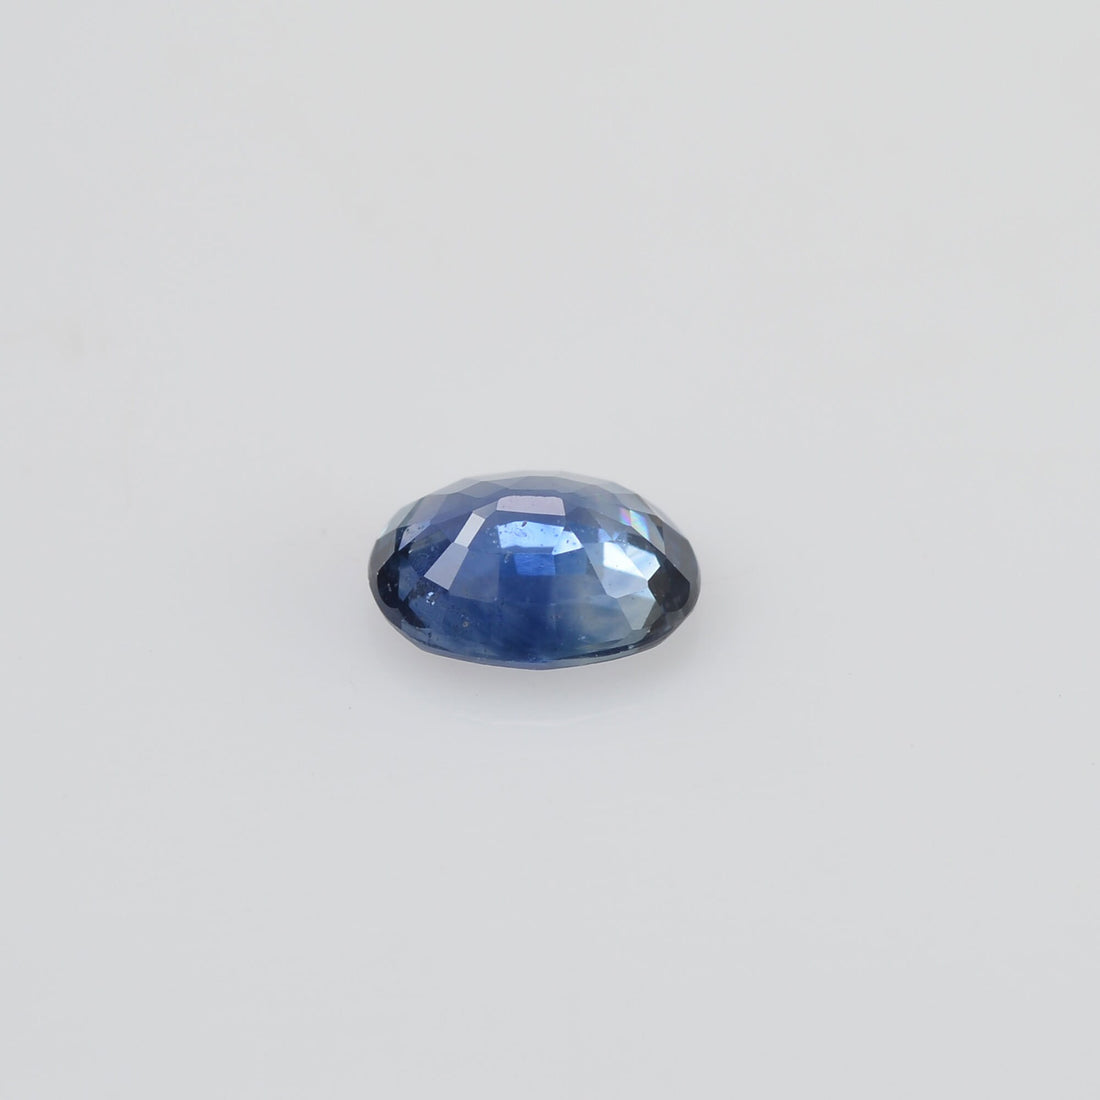 0.54 Cts Natural Blue Sapphire Loose Gemstone Oval Cut